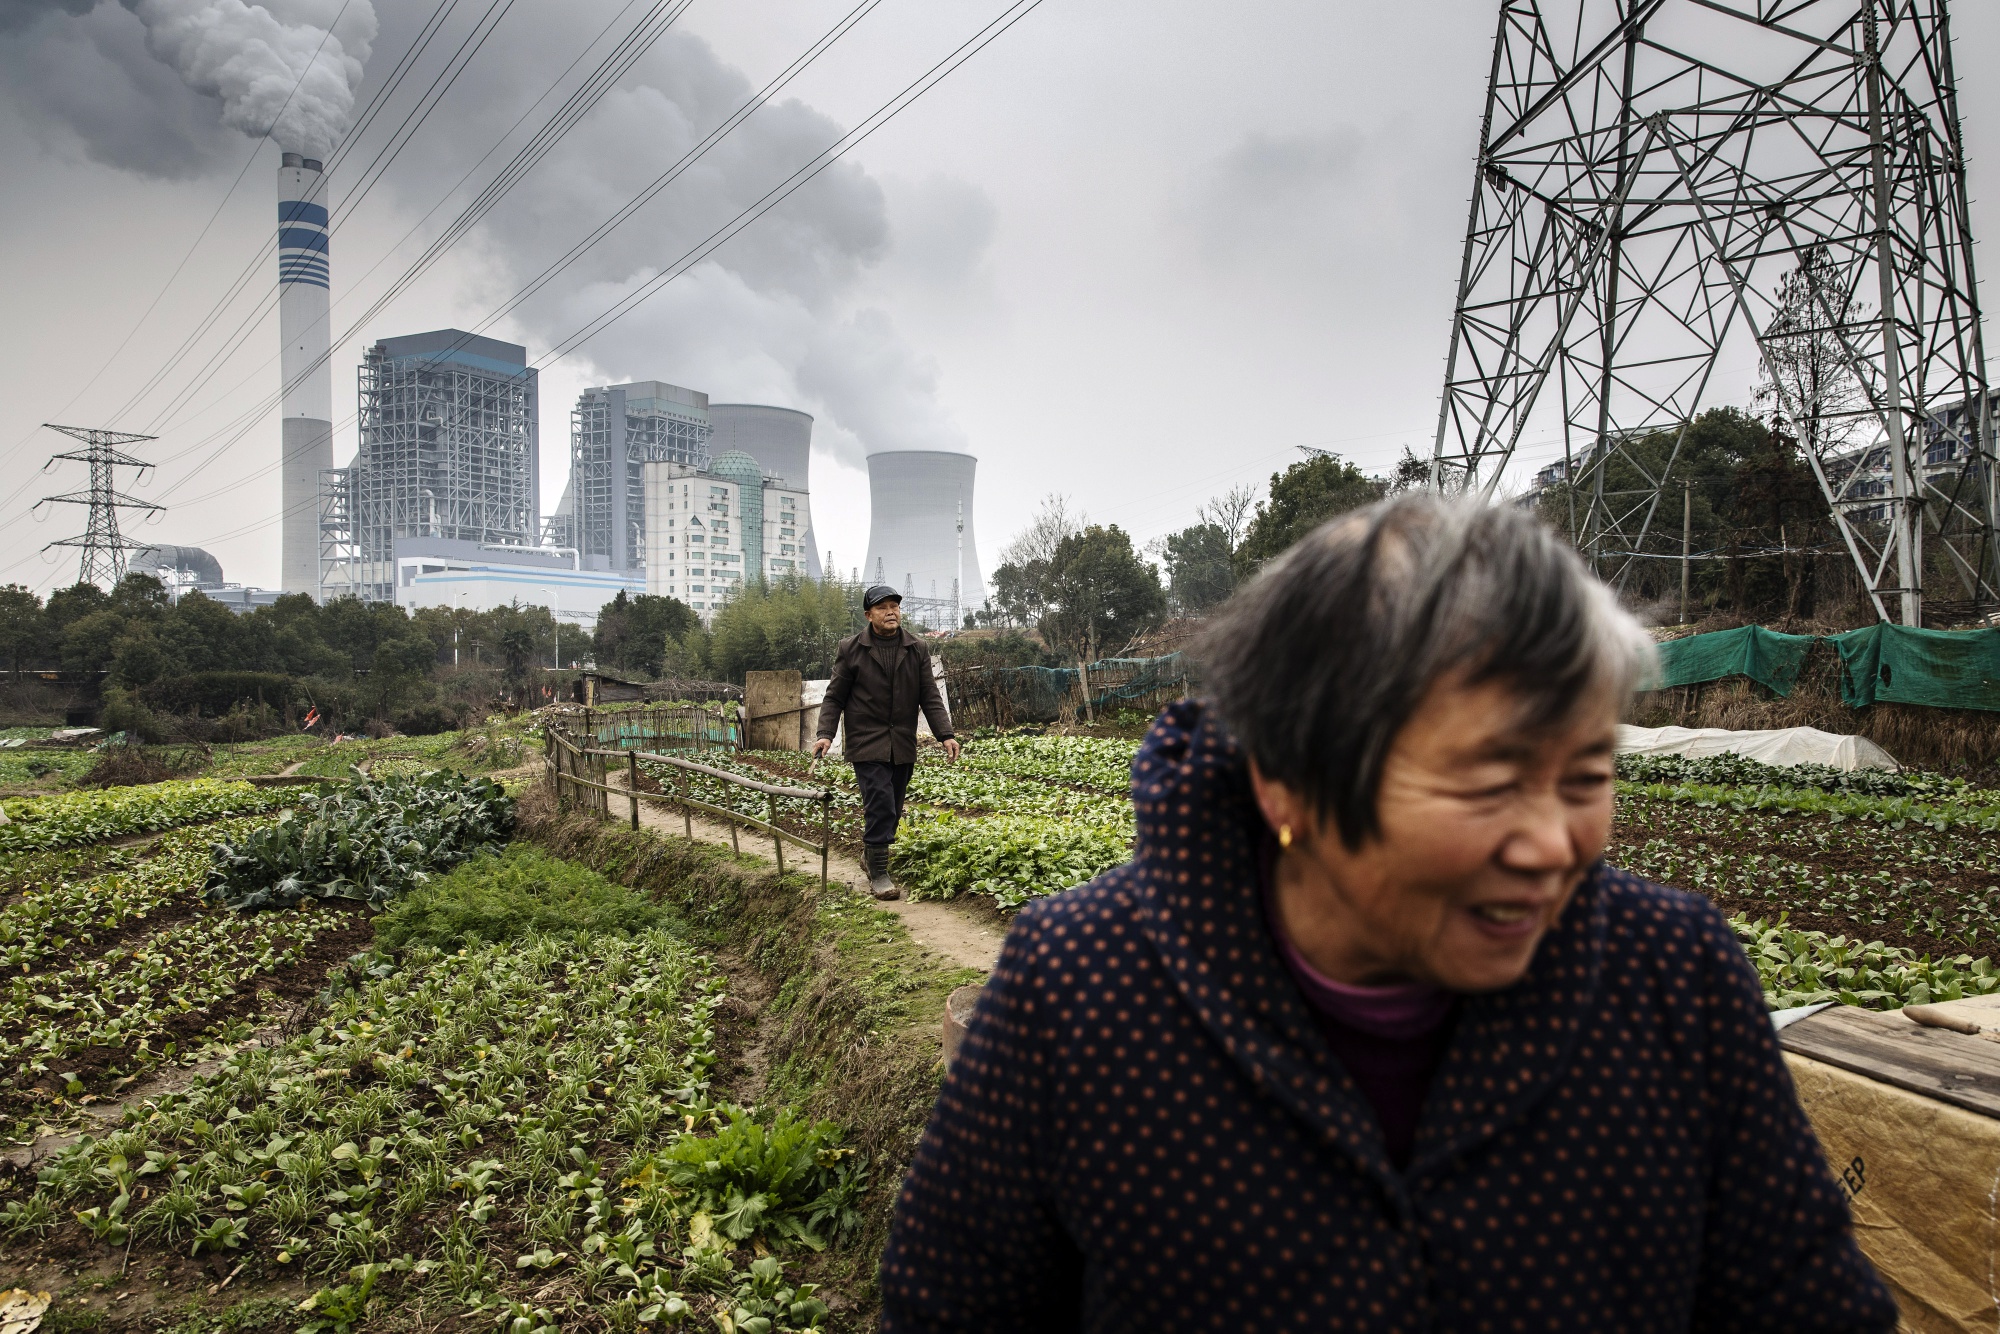 Emissions rise from cooling towers at a coal-fired power station in Tongling, Anhui province, China.